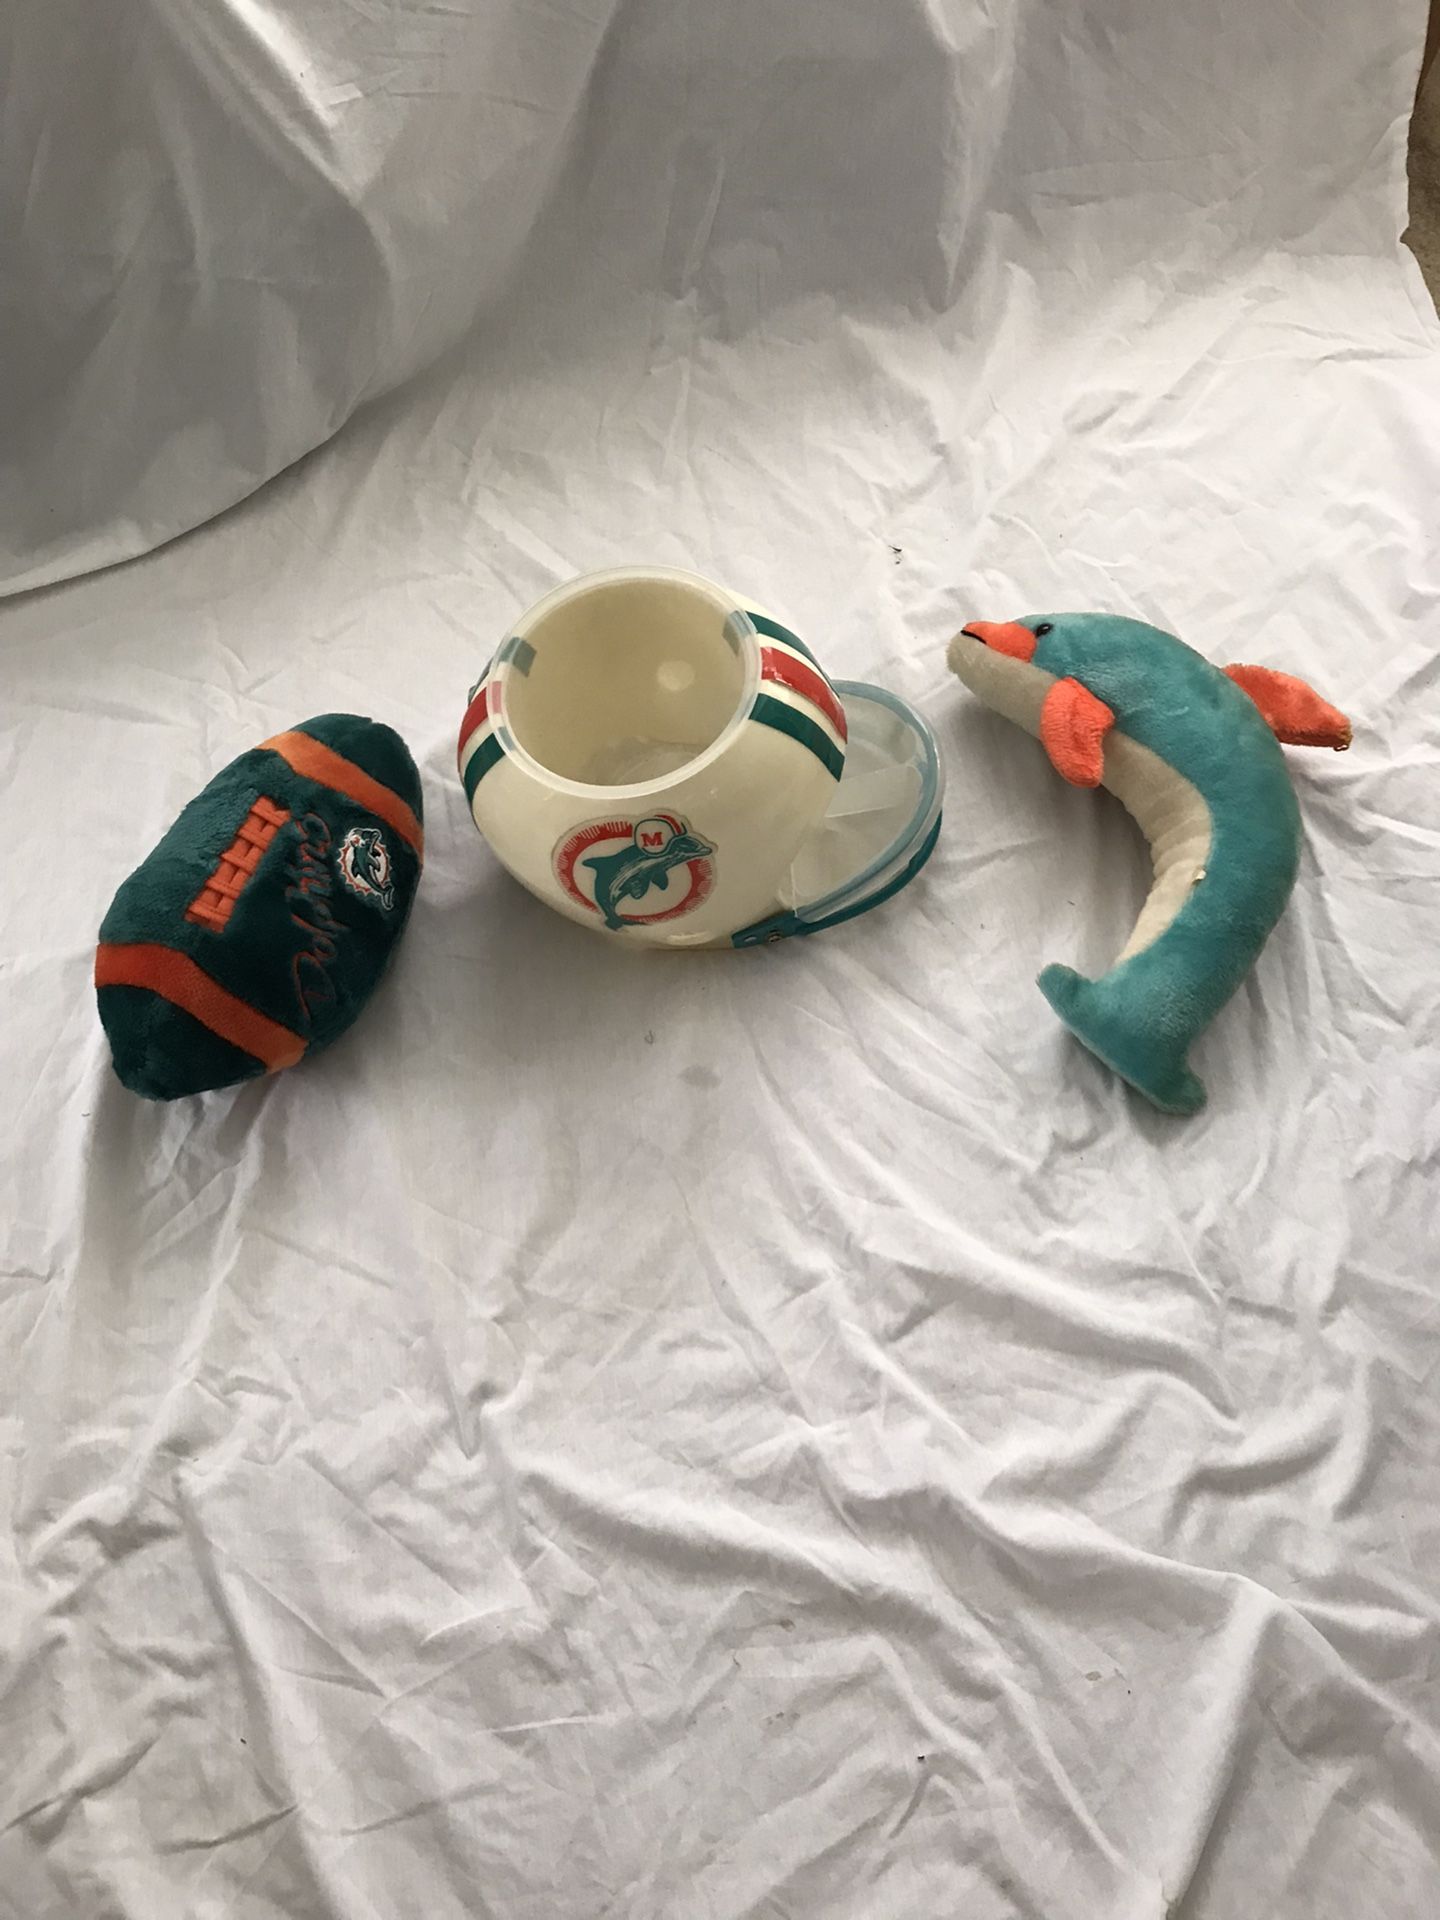 Miami Dolphin Chip & Dip & Stuffed Football And Dolphin Toy